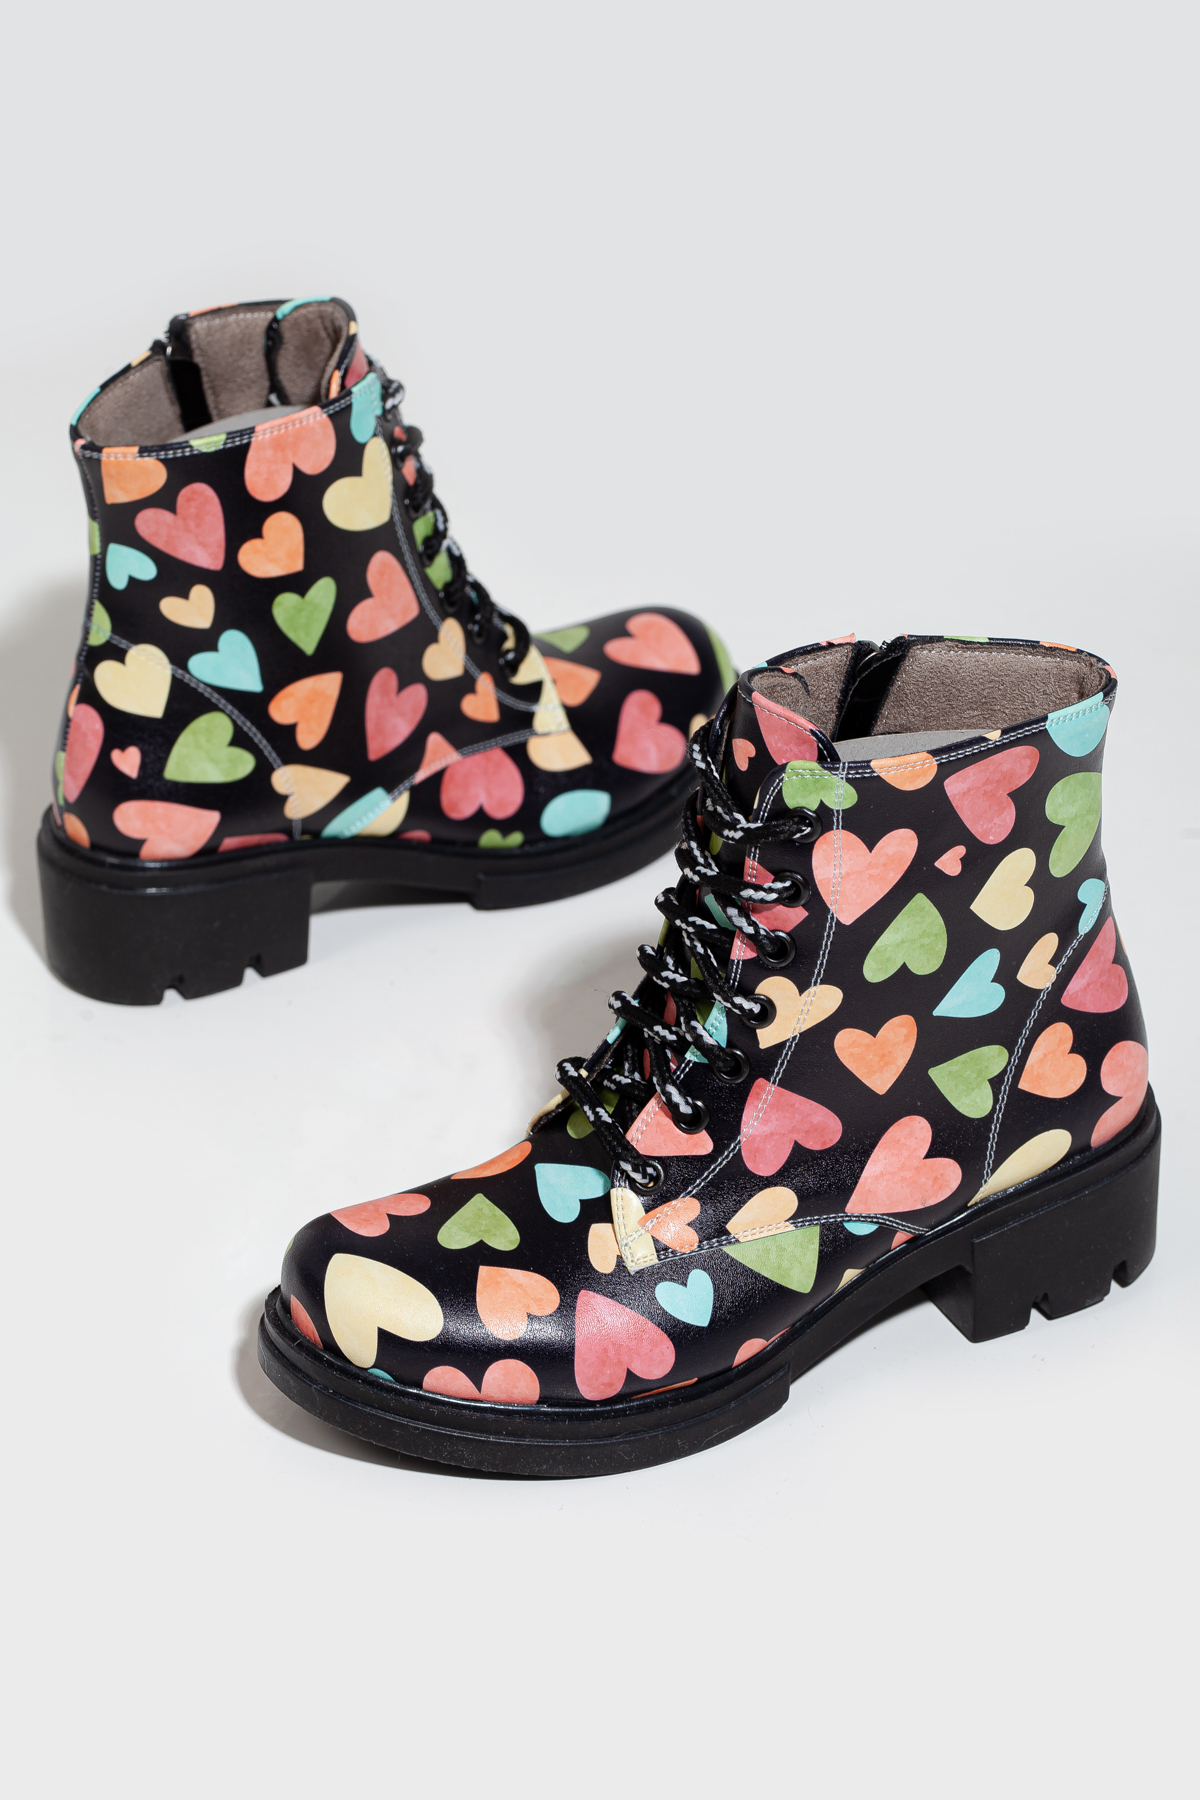 Heart-patterned chunky heeled boots